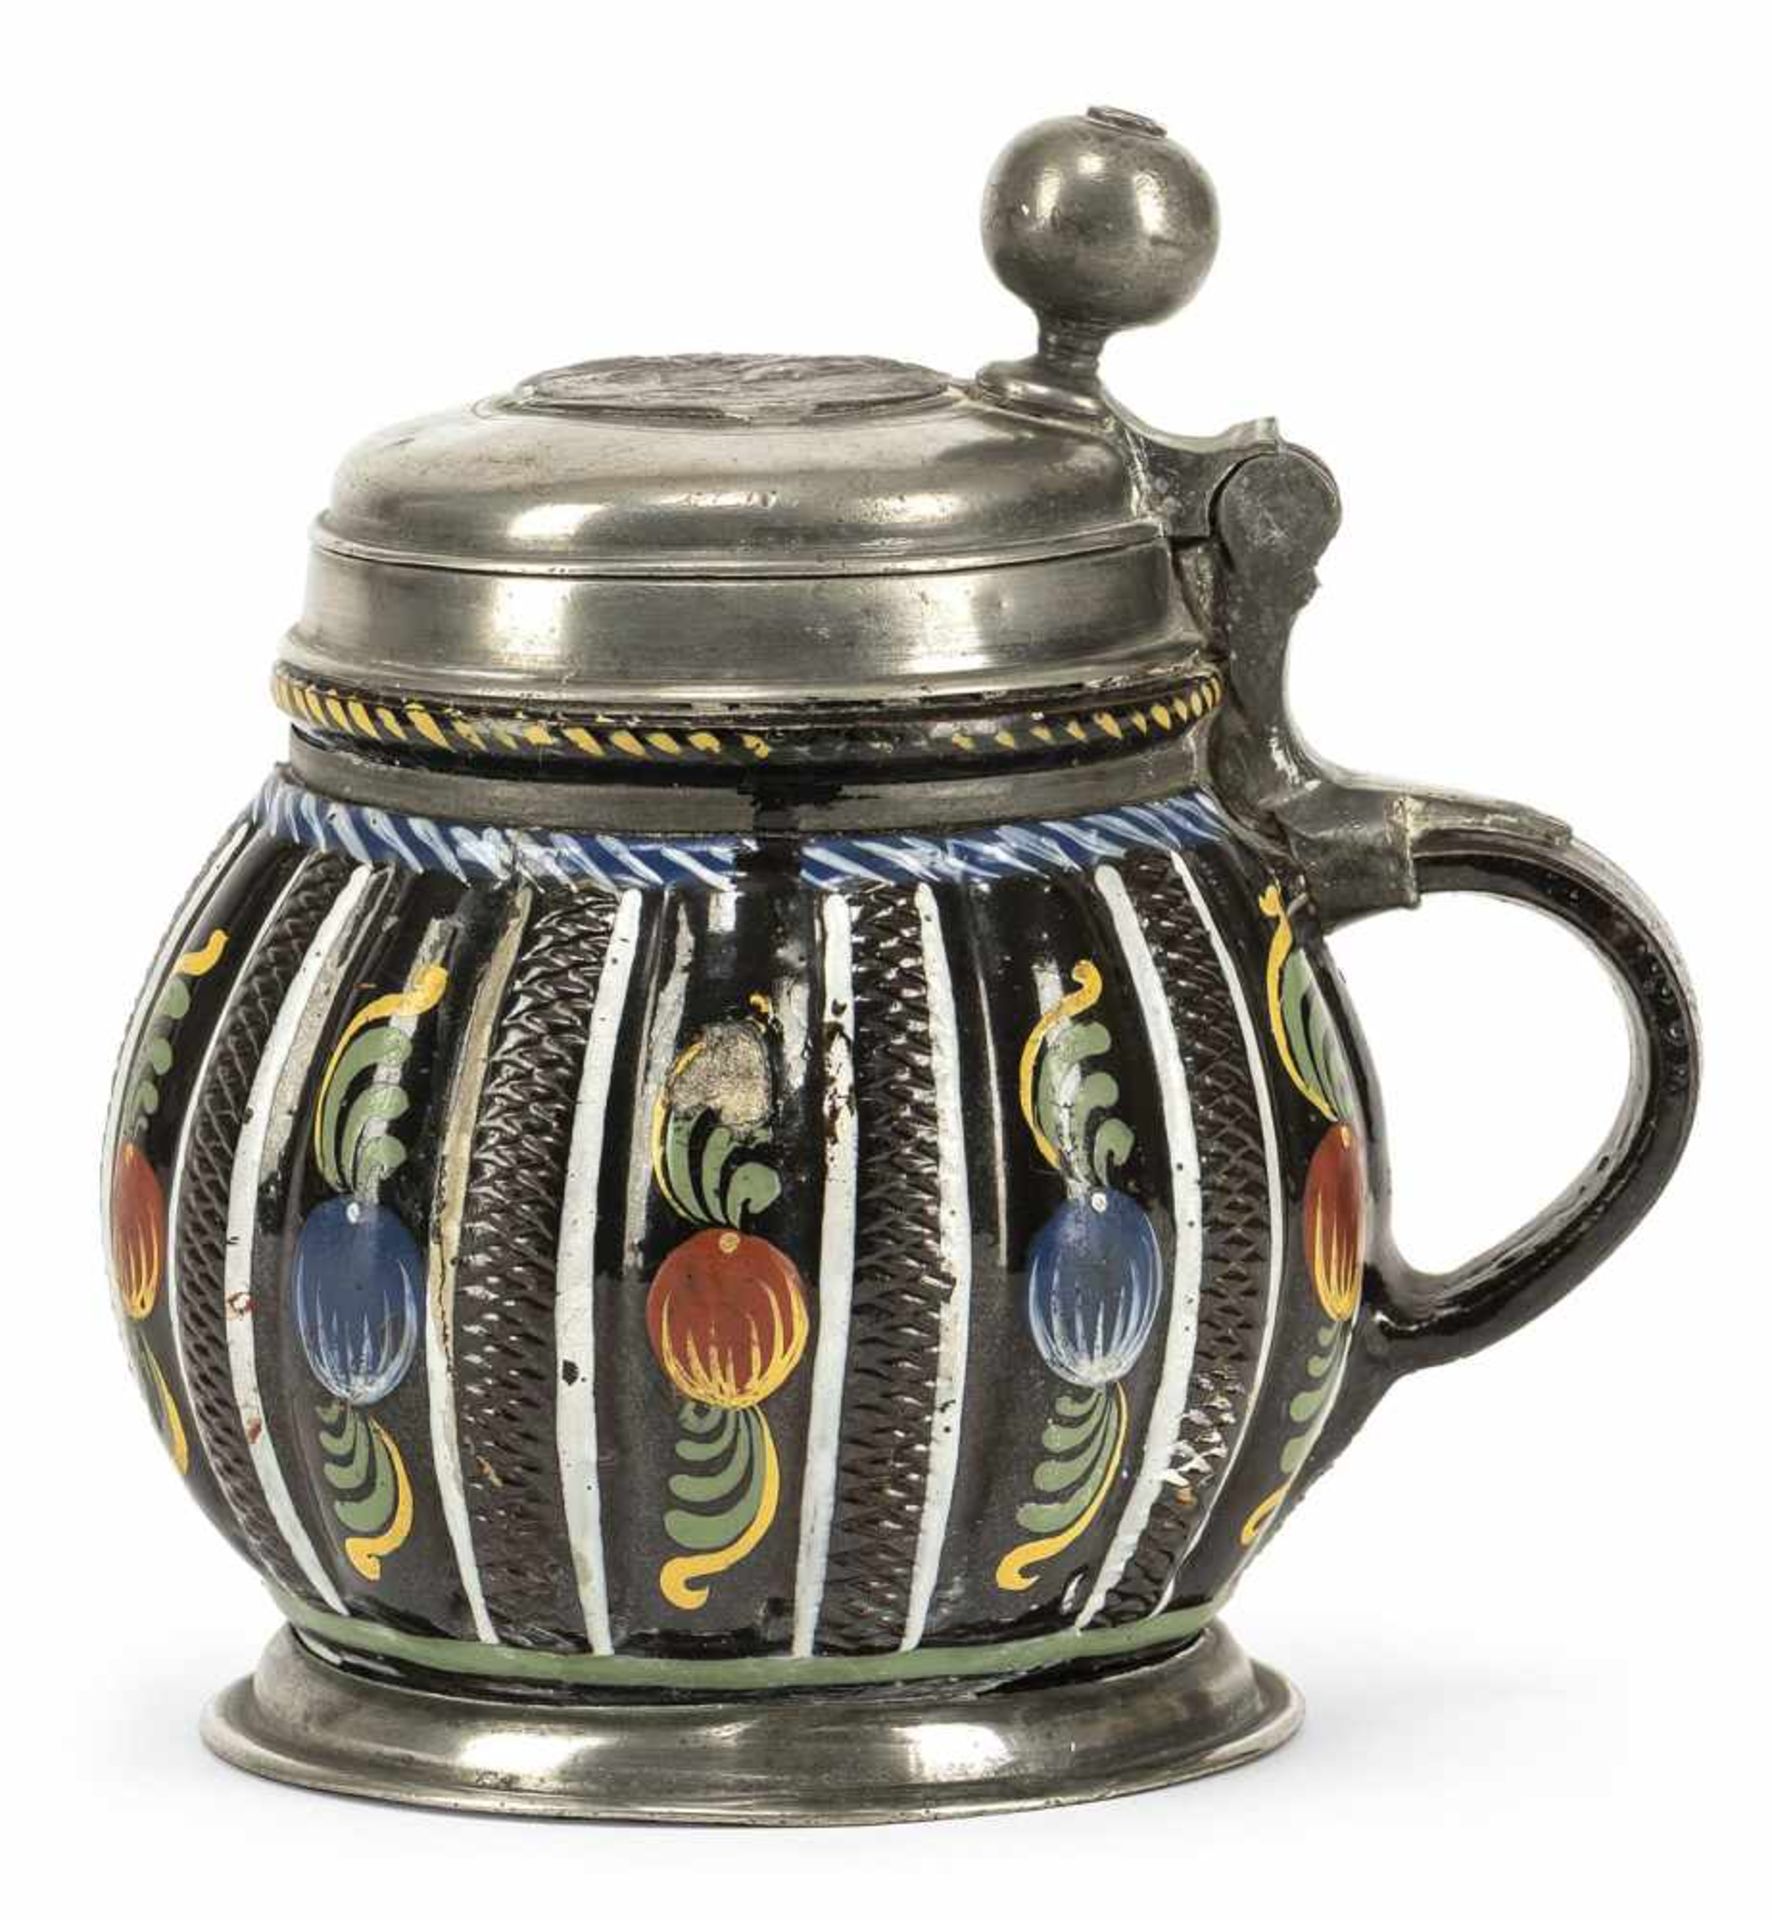 DIPPOLDISWALDE BROWN STEIN, polychrome pattern of pomegranates, pewter mounts. C. 1680. Damages.